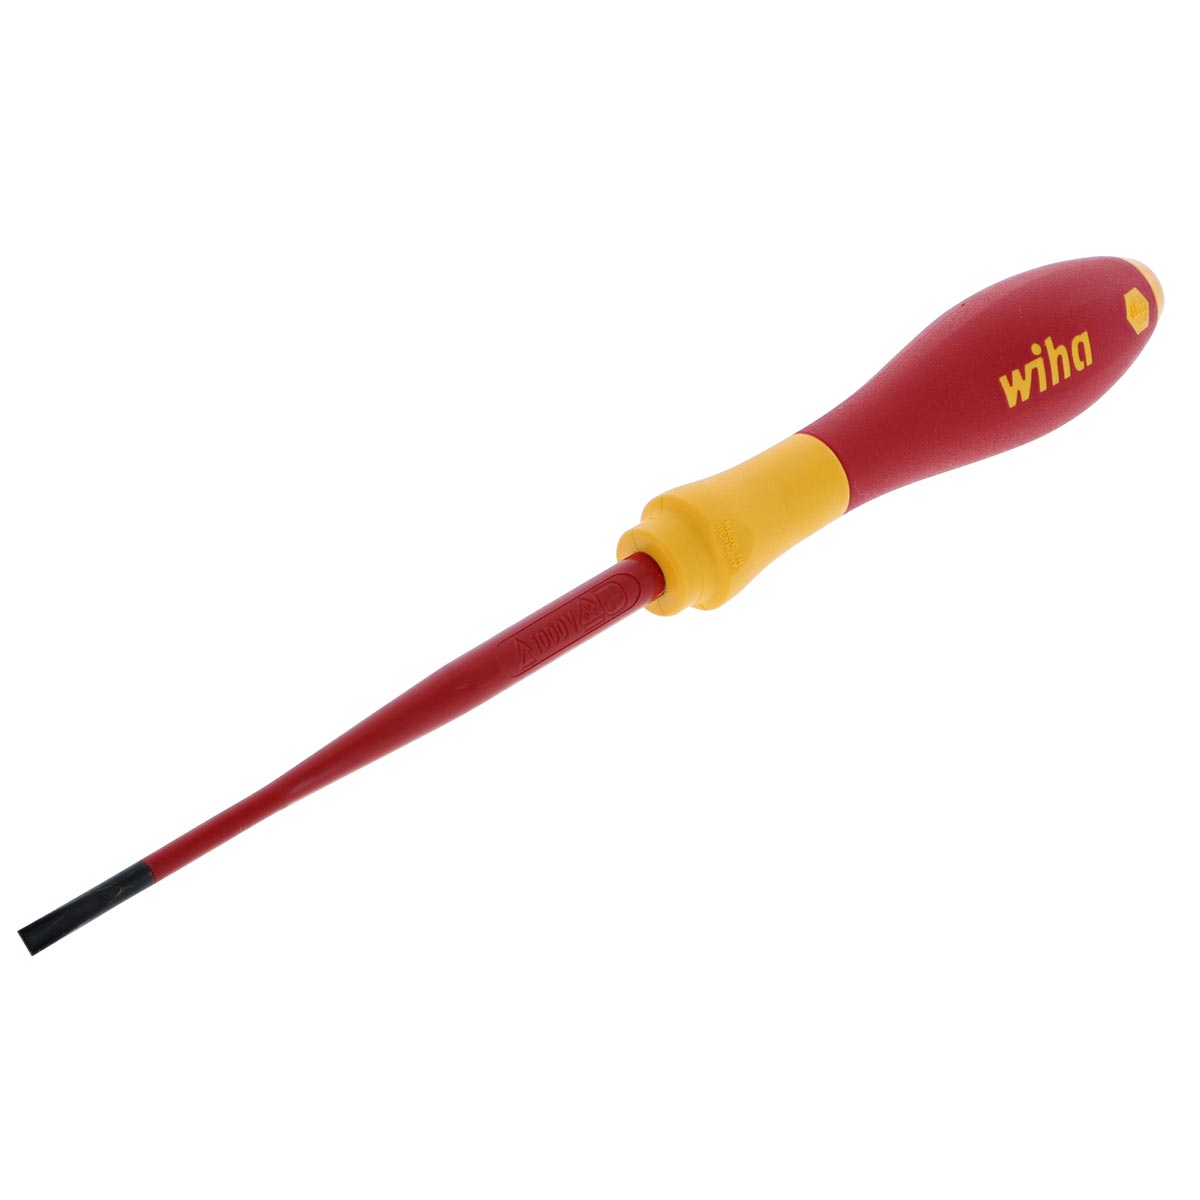 Wiha Insulated Slimline Slotted Screwdriver With Cushion Grip 3.5mm X 100mm